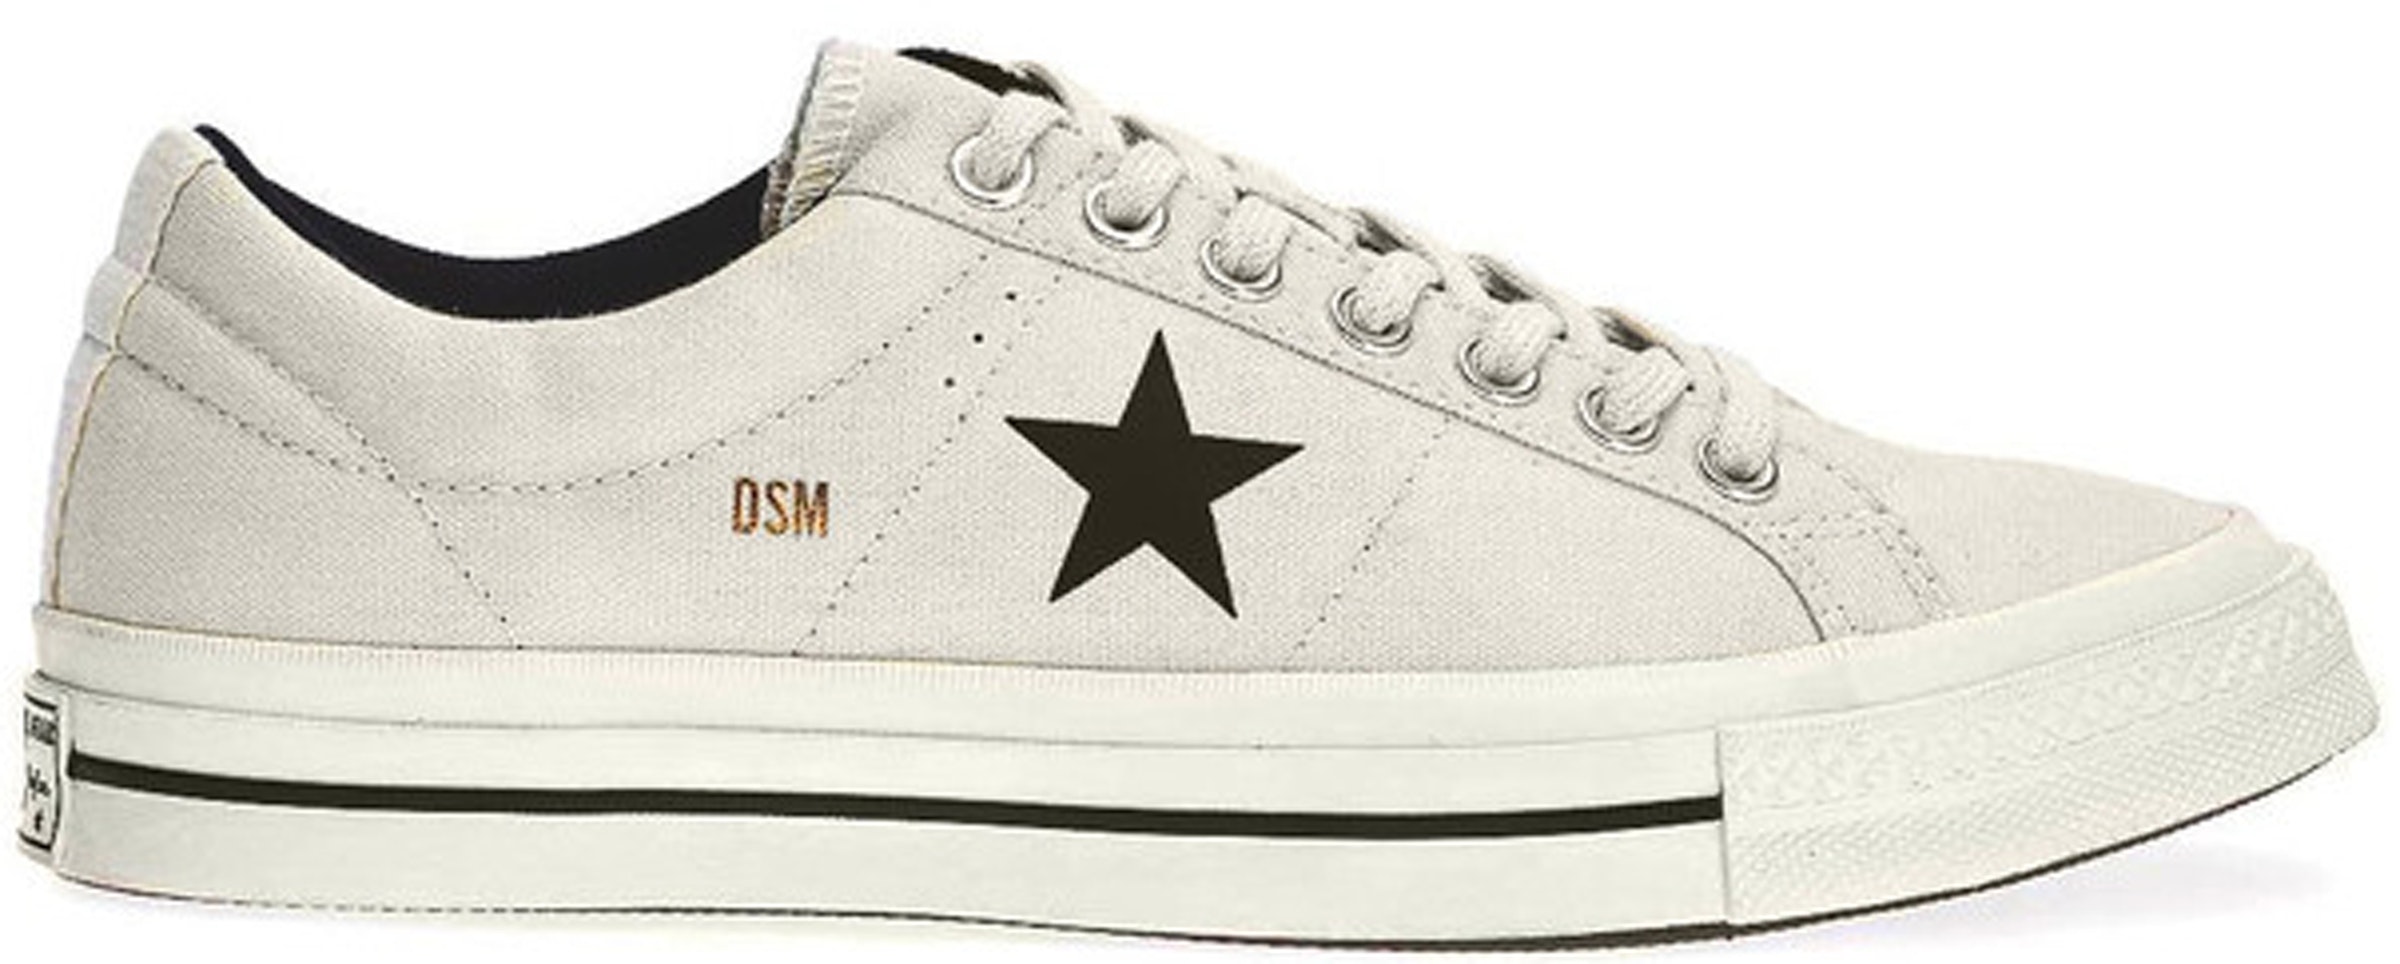 Converse One Star Canvas Dover Street Market White Hombre - 162293C - US